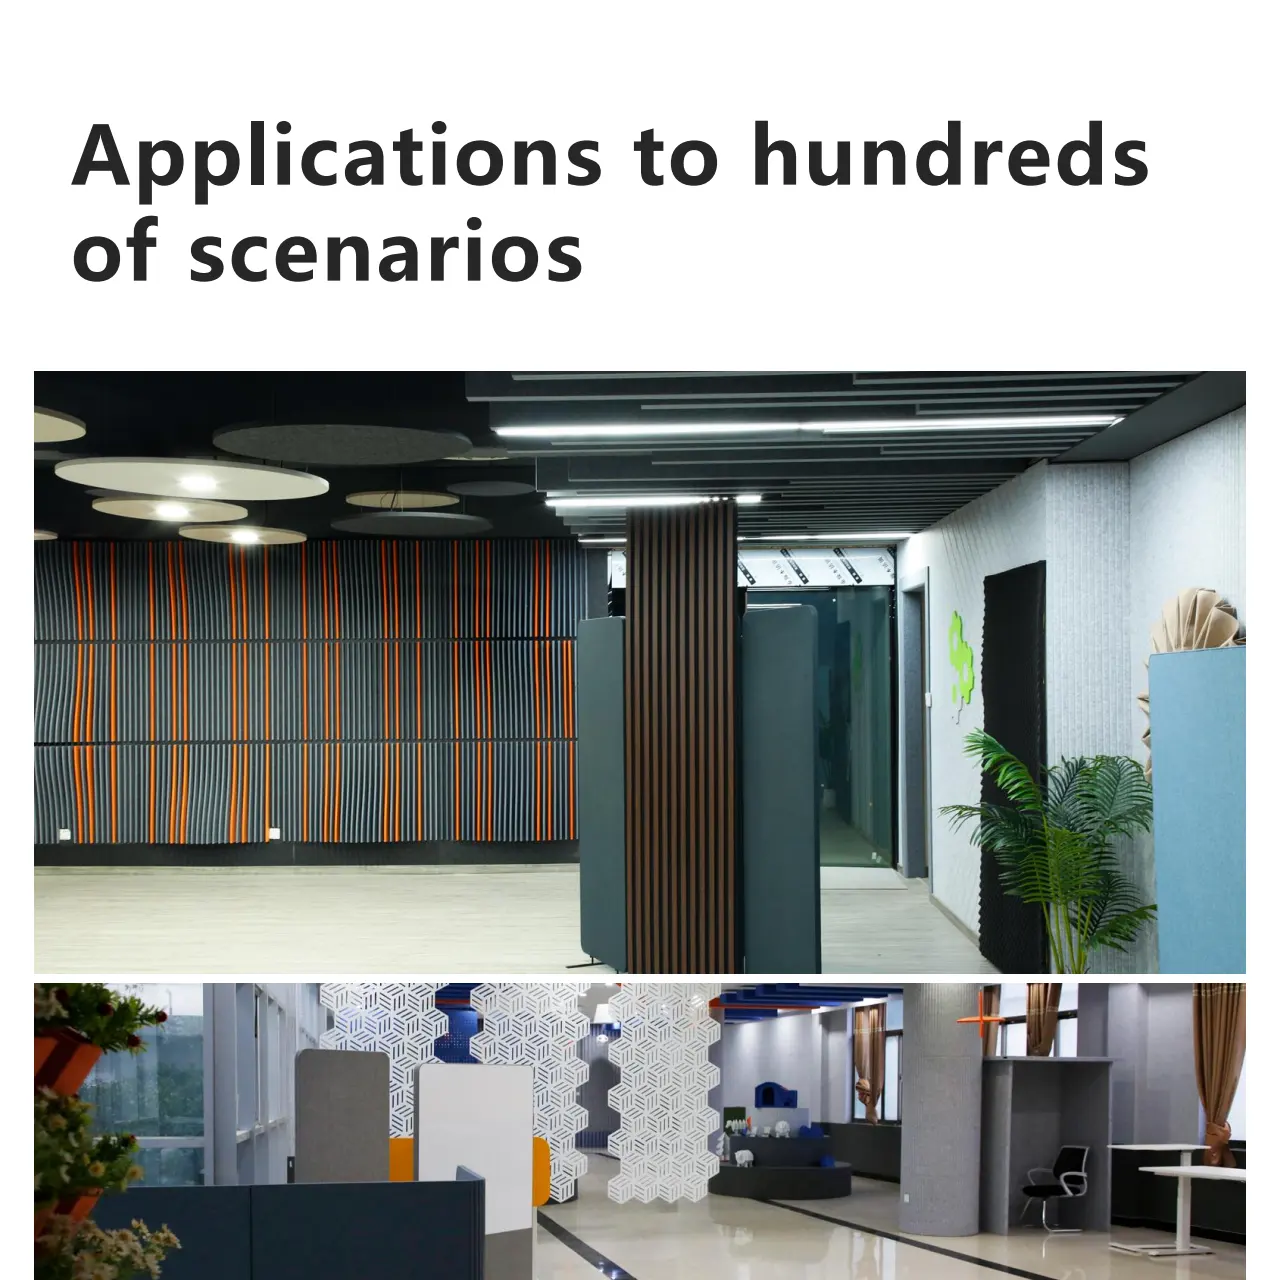 Sound Absorbing Acoustic Wall for Students Office Reduce Noise Distractions soundproof Partition